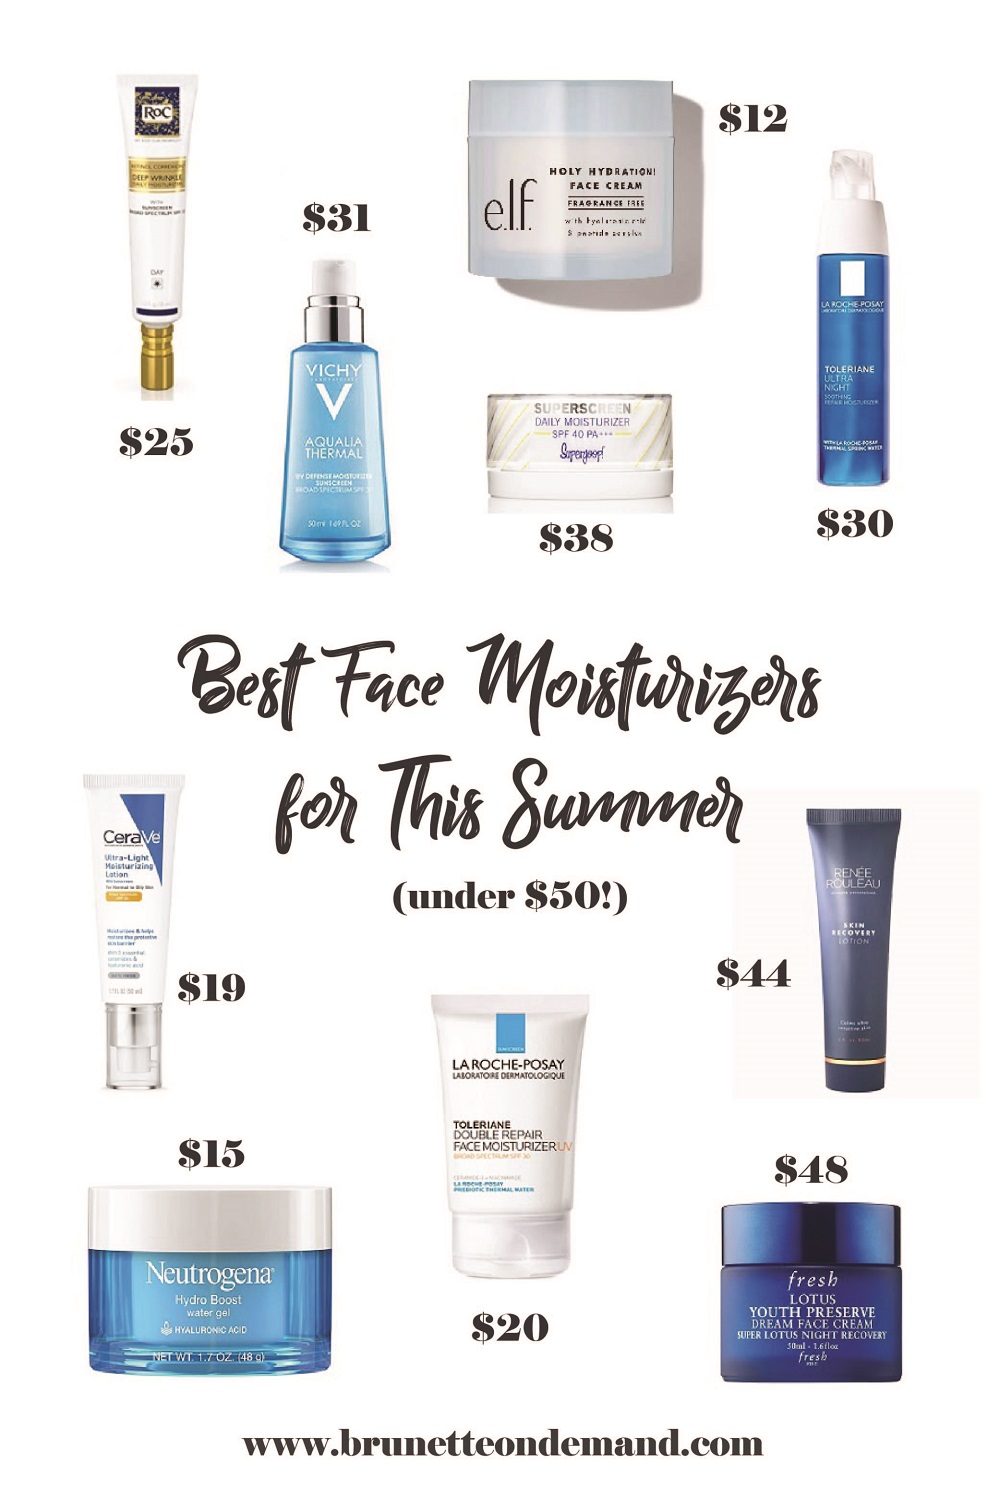 Best Face Moisturizers for This Summer Under $50